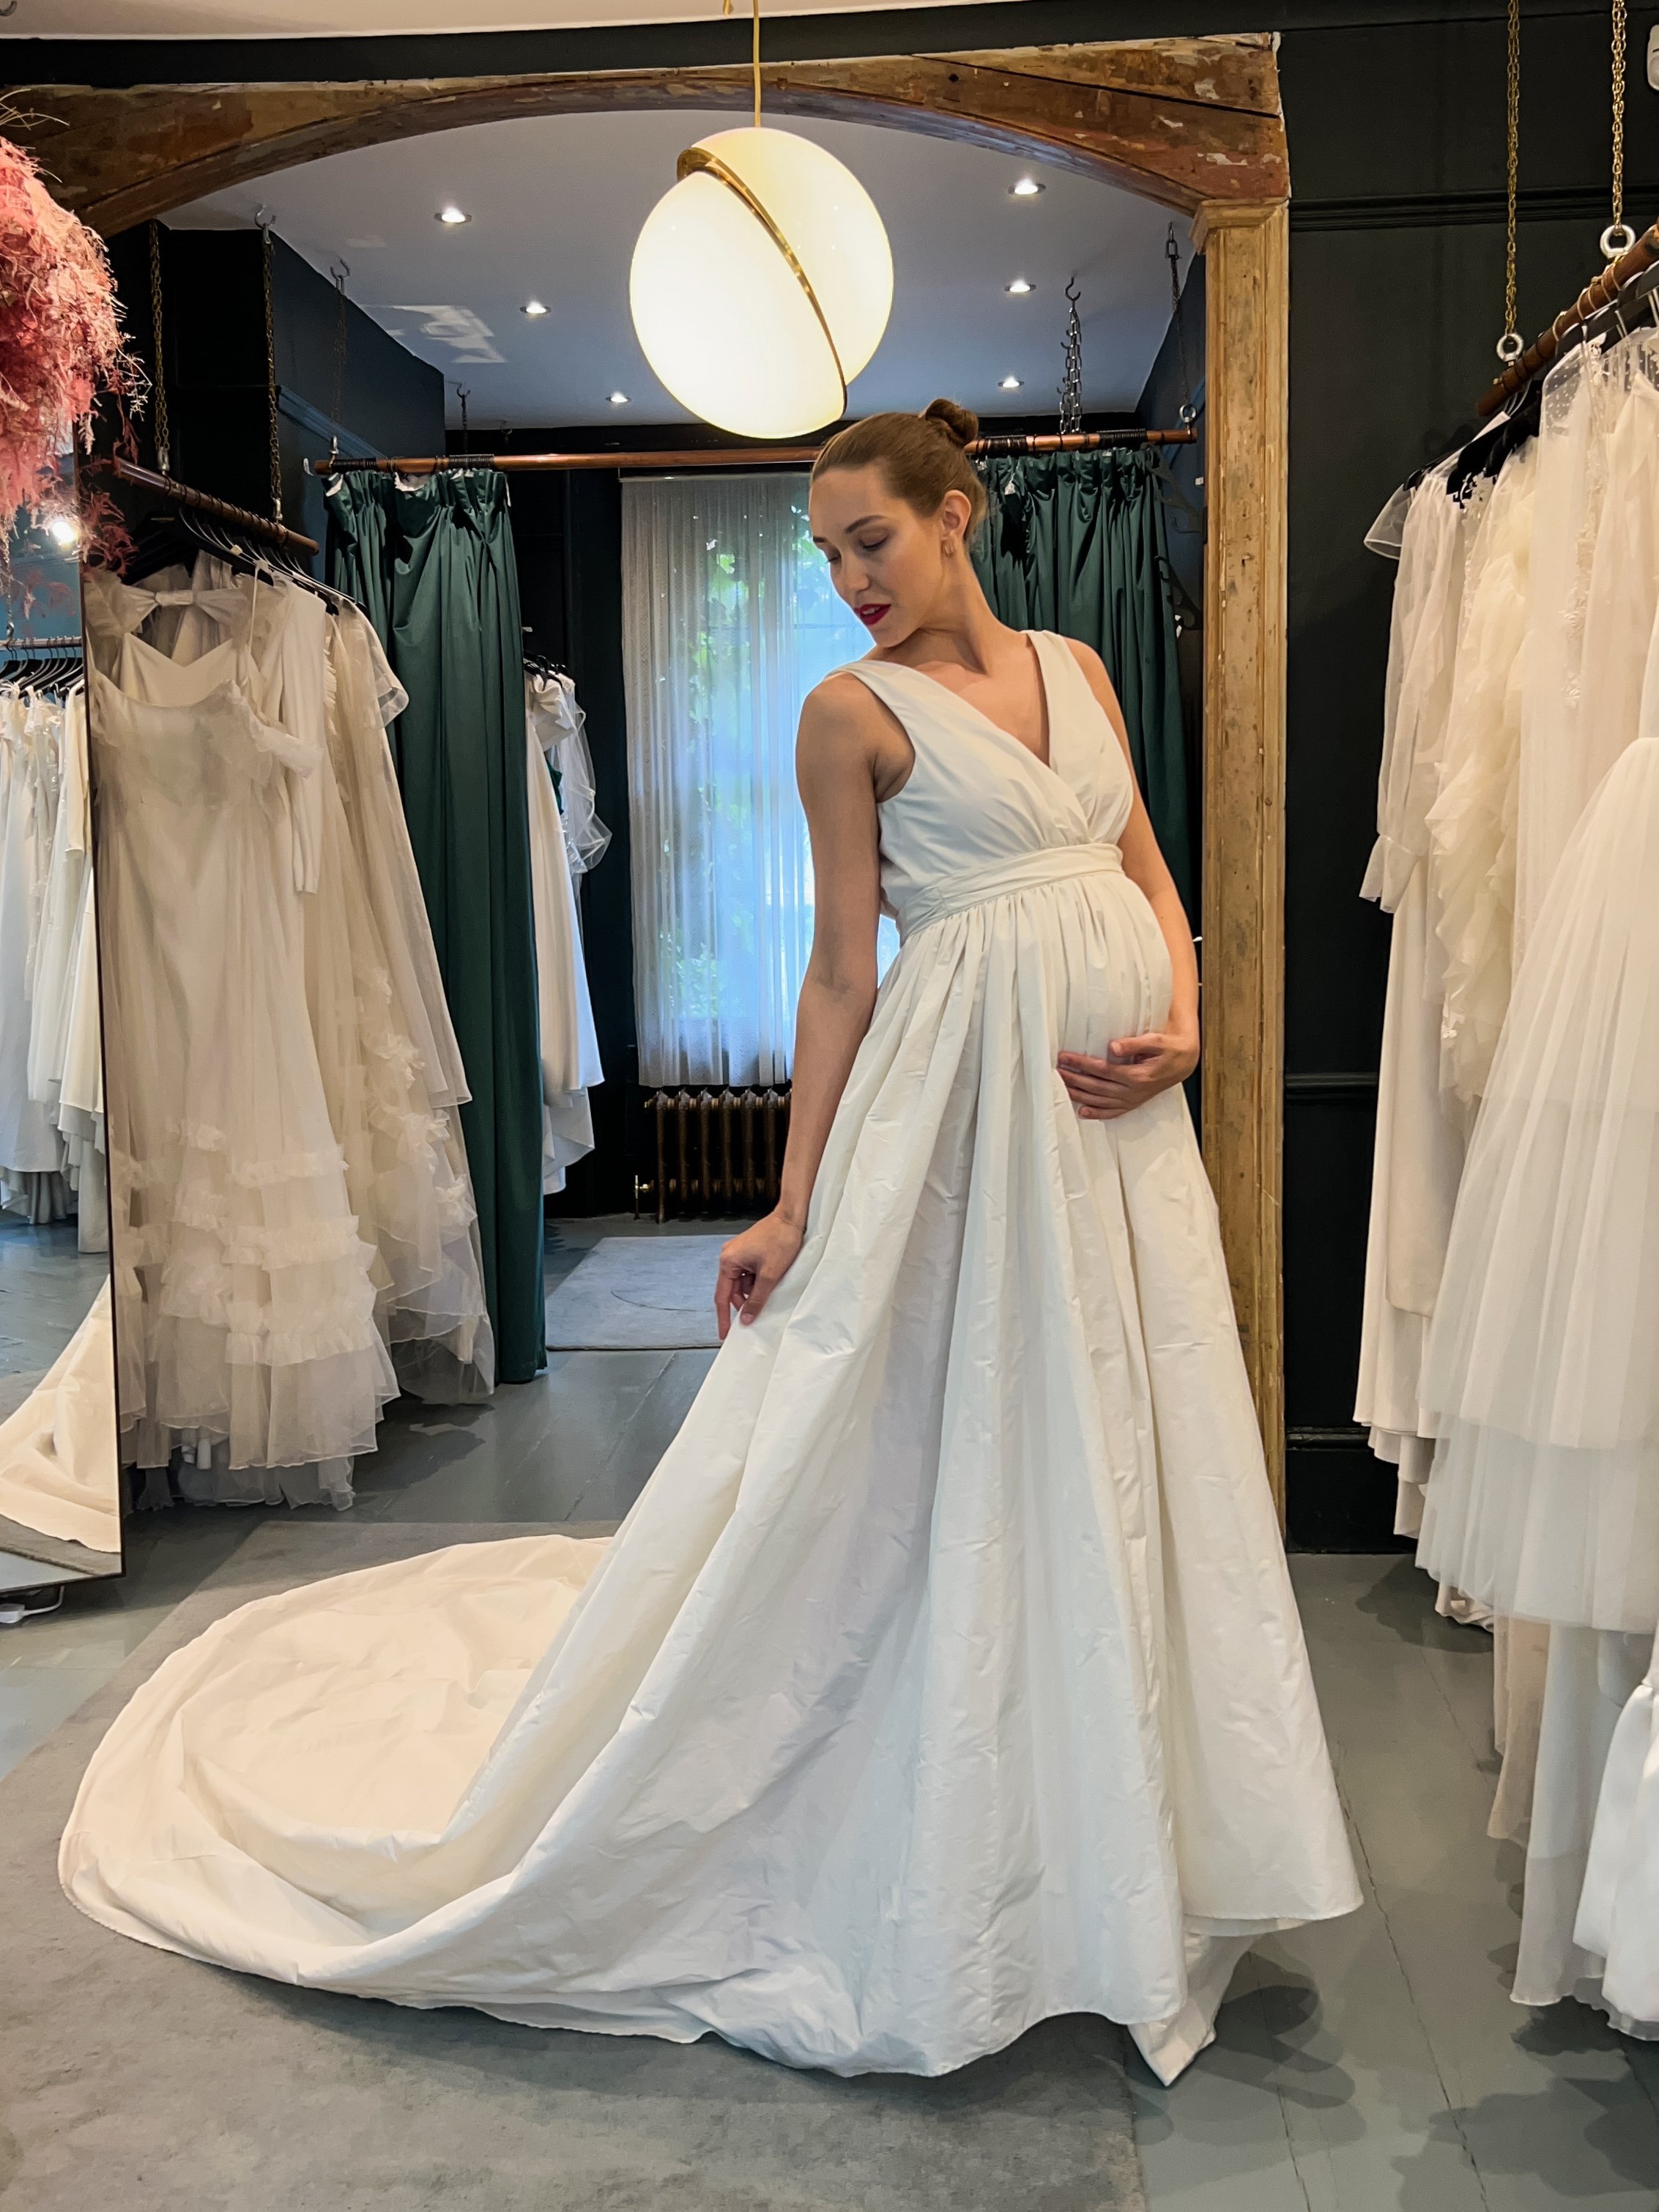 Wedding dress advice | What to do if you become pregnant before your wedding | Halfpenny London